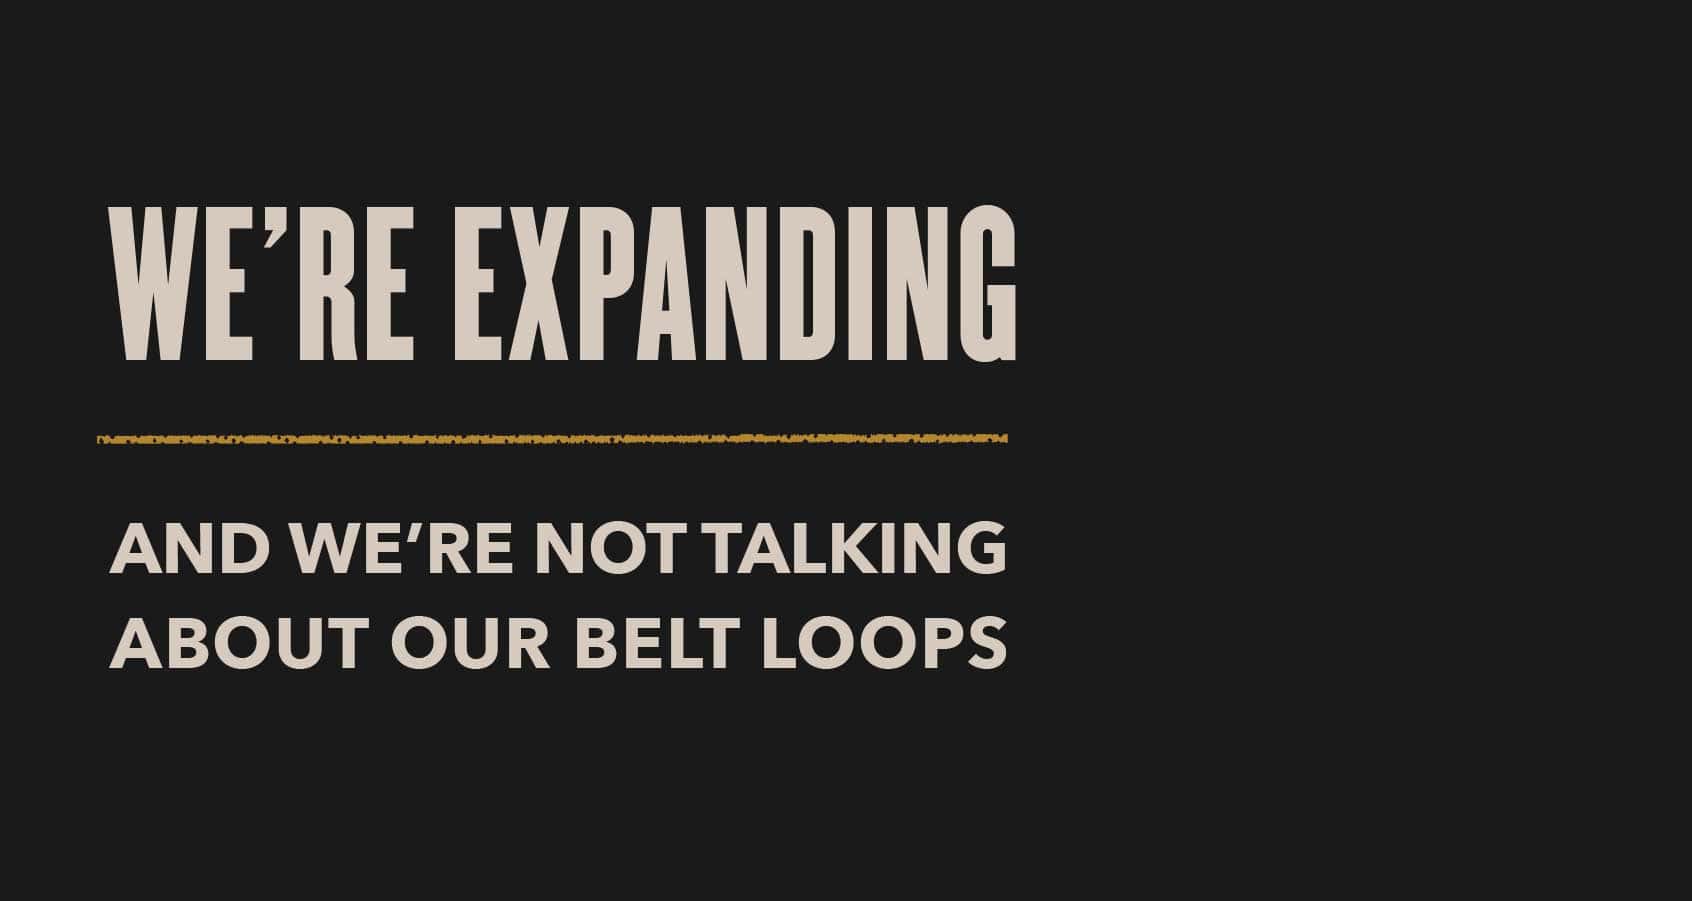 We're expanding and we're not talking about our belt loops